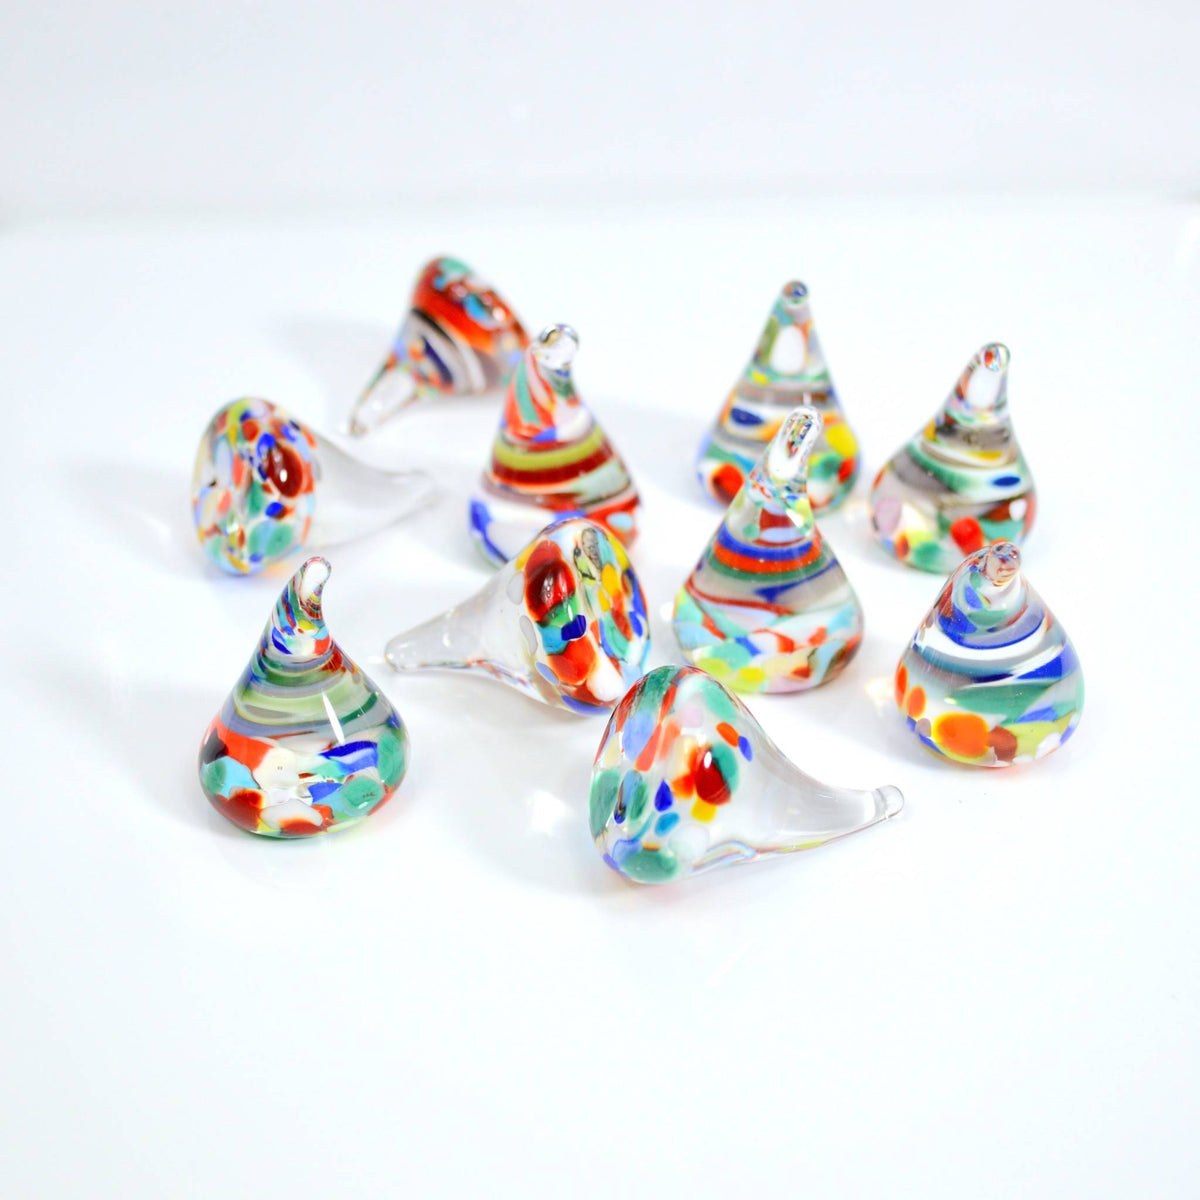 Murano Glass Candy Kisses Set of 3, 5, or 10, Made in Italy - My Italian Decor